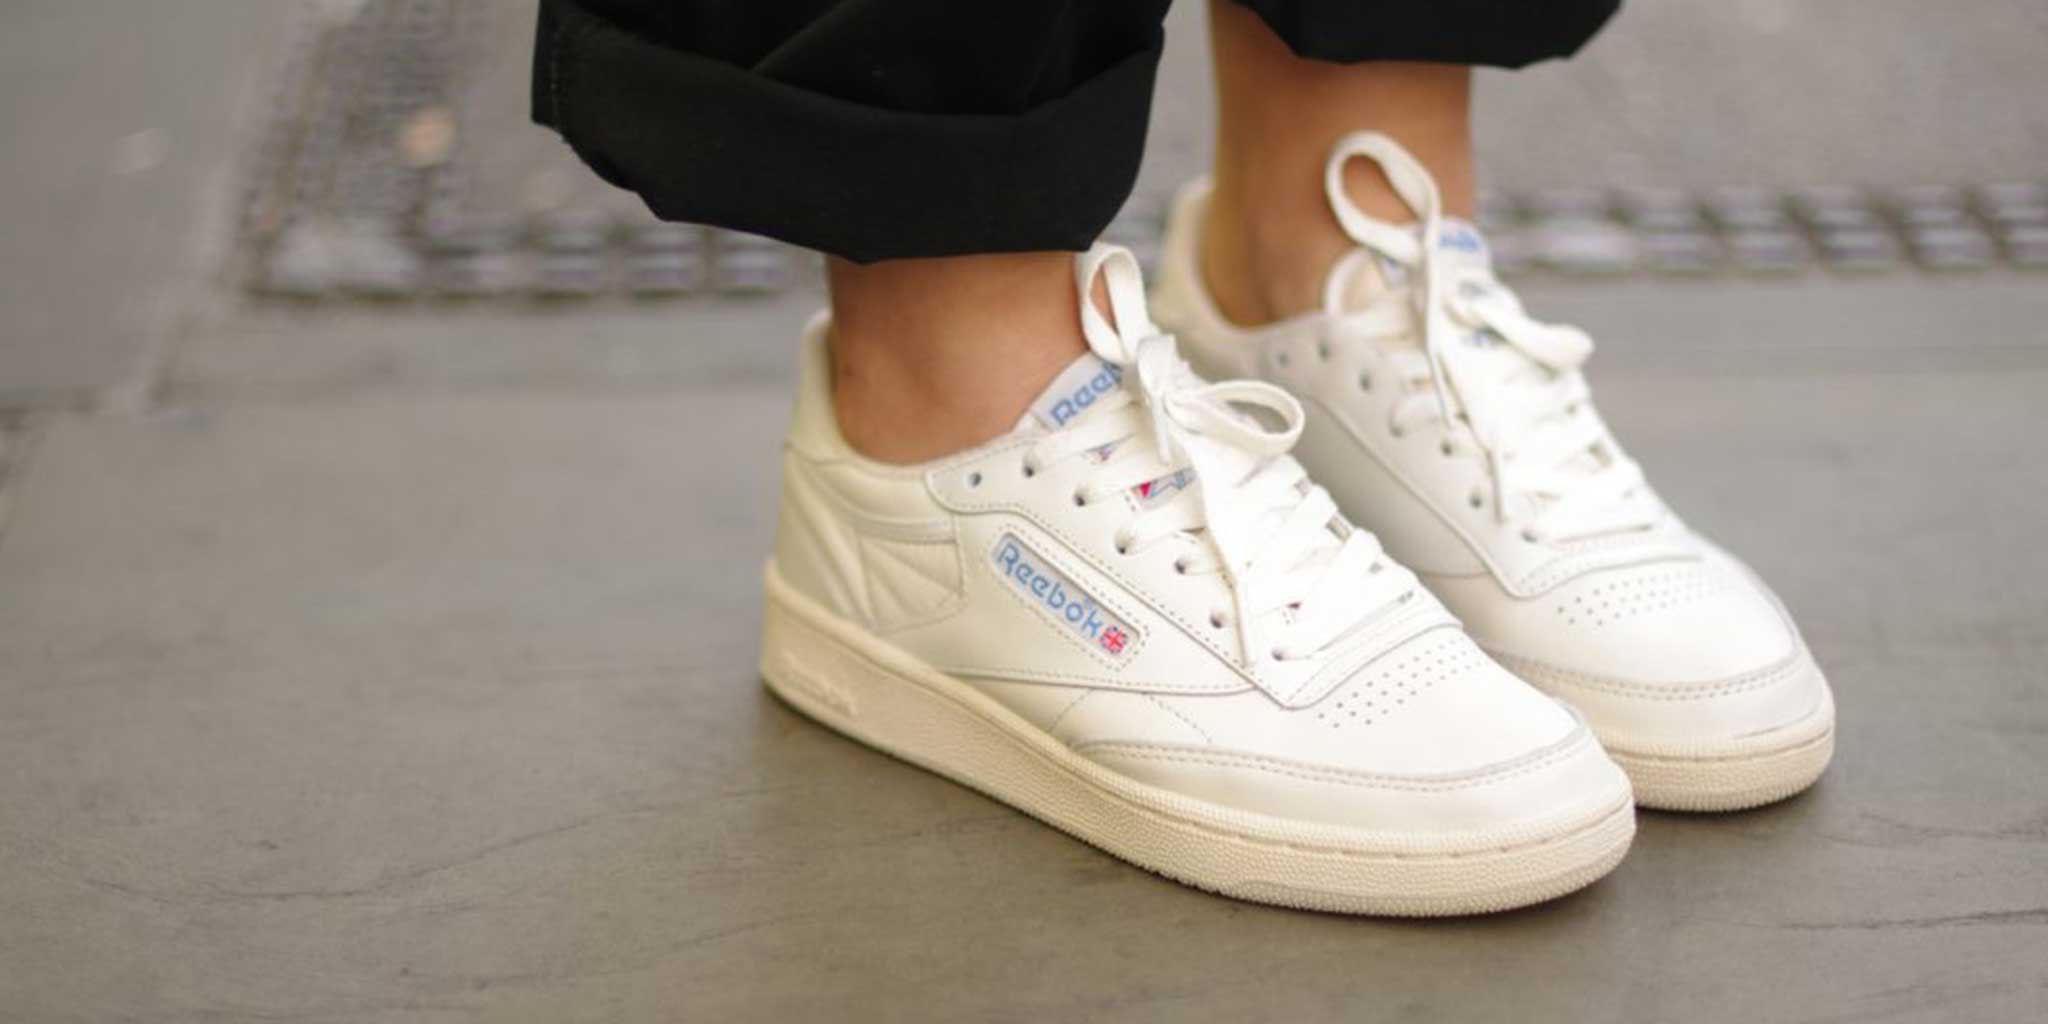 Reebok Club c 85 Vintage in Athletic Blue and Glen Green - Pam Pam ...